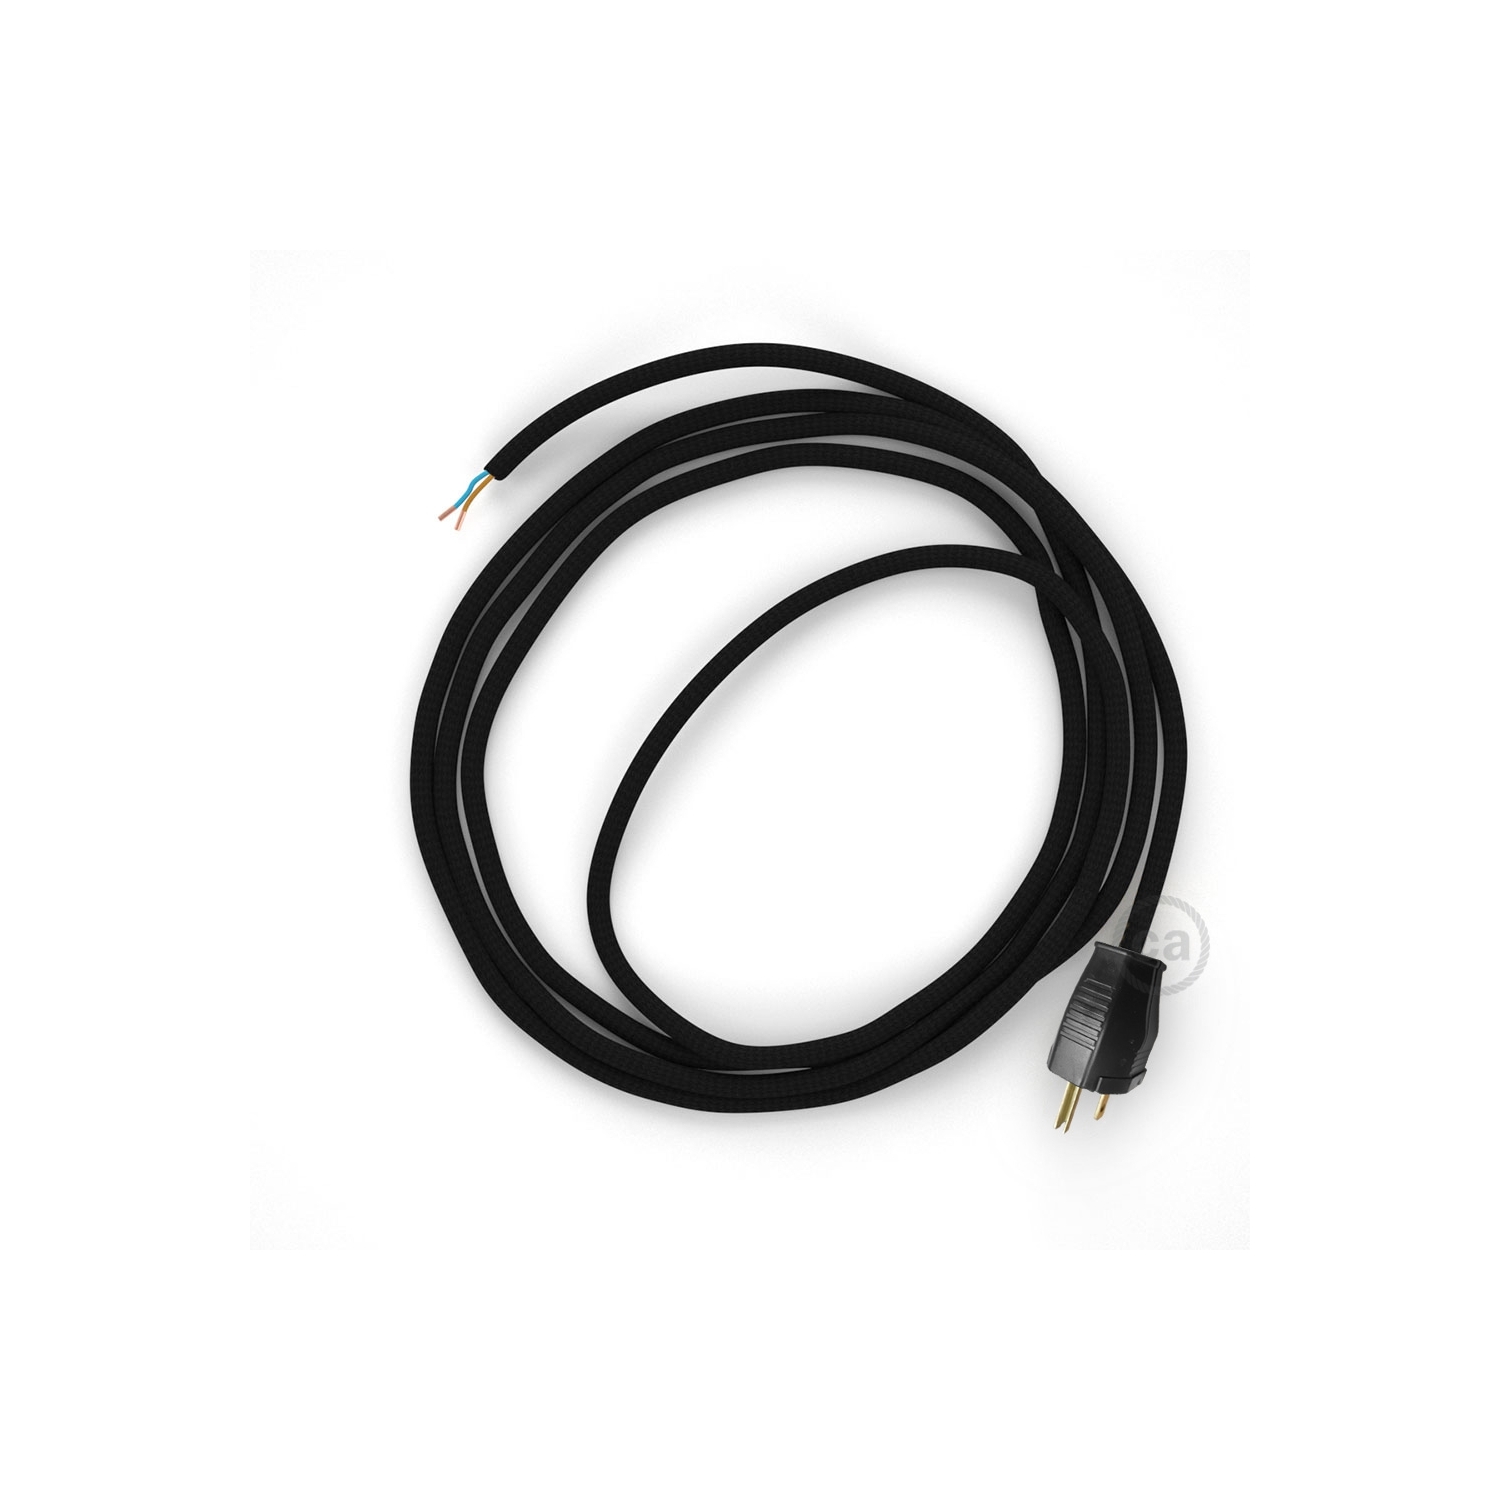 Cord-set - RM04 Black Rayon Covered Round Cable